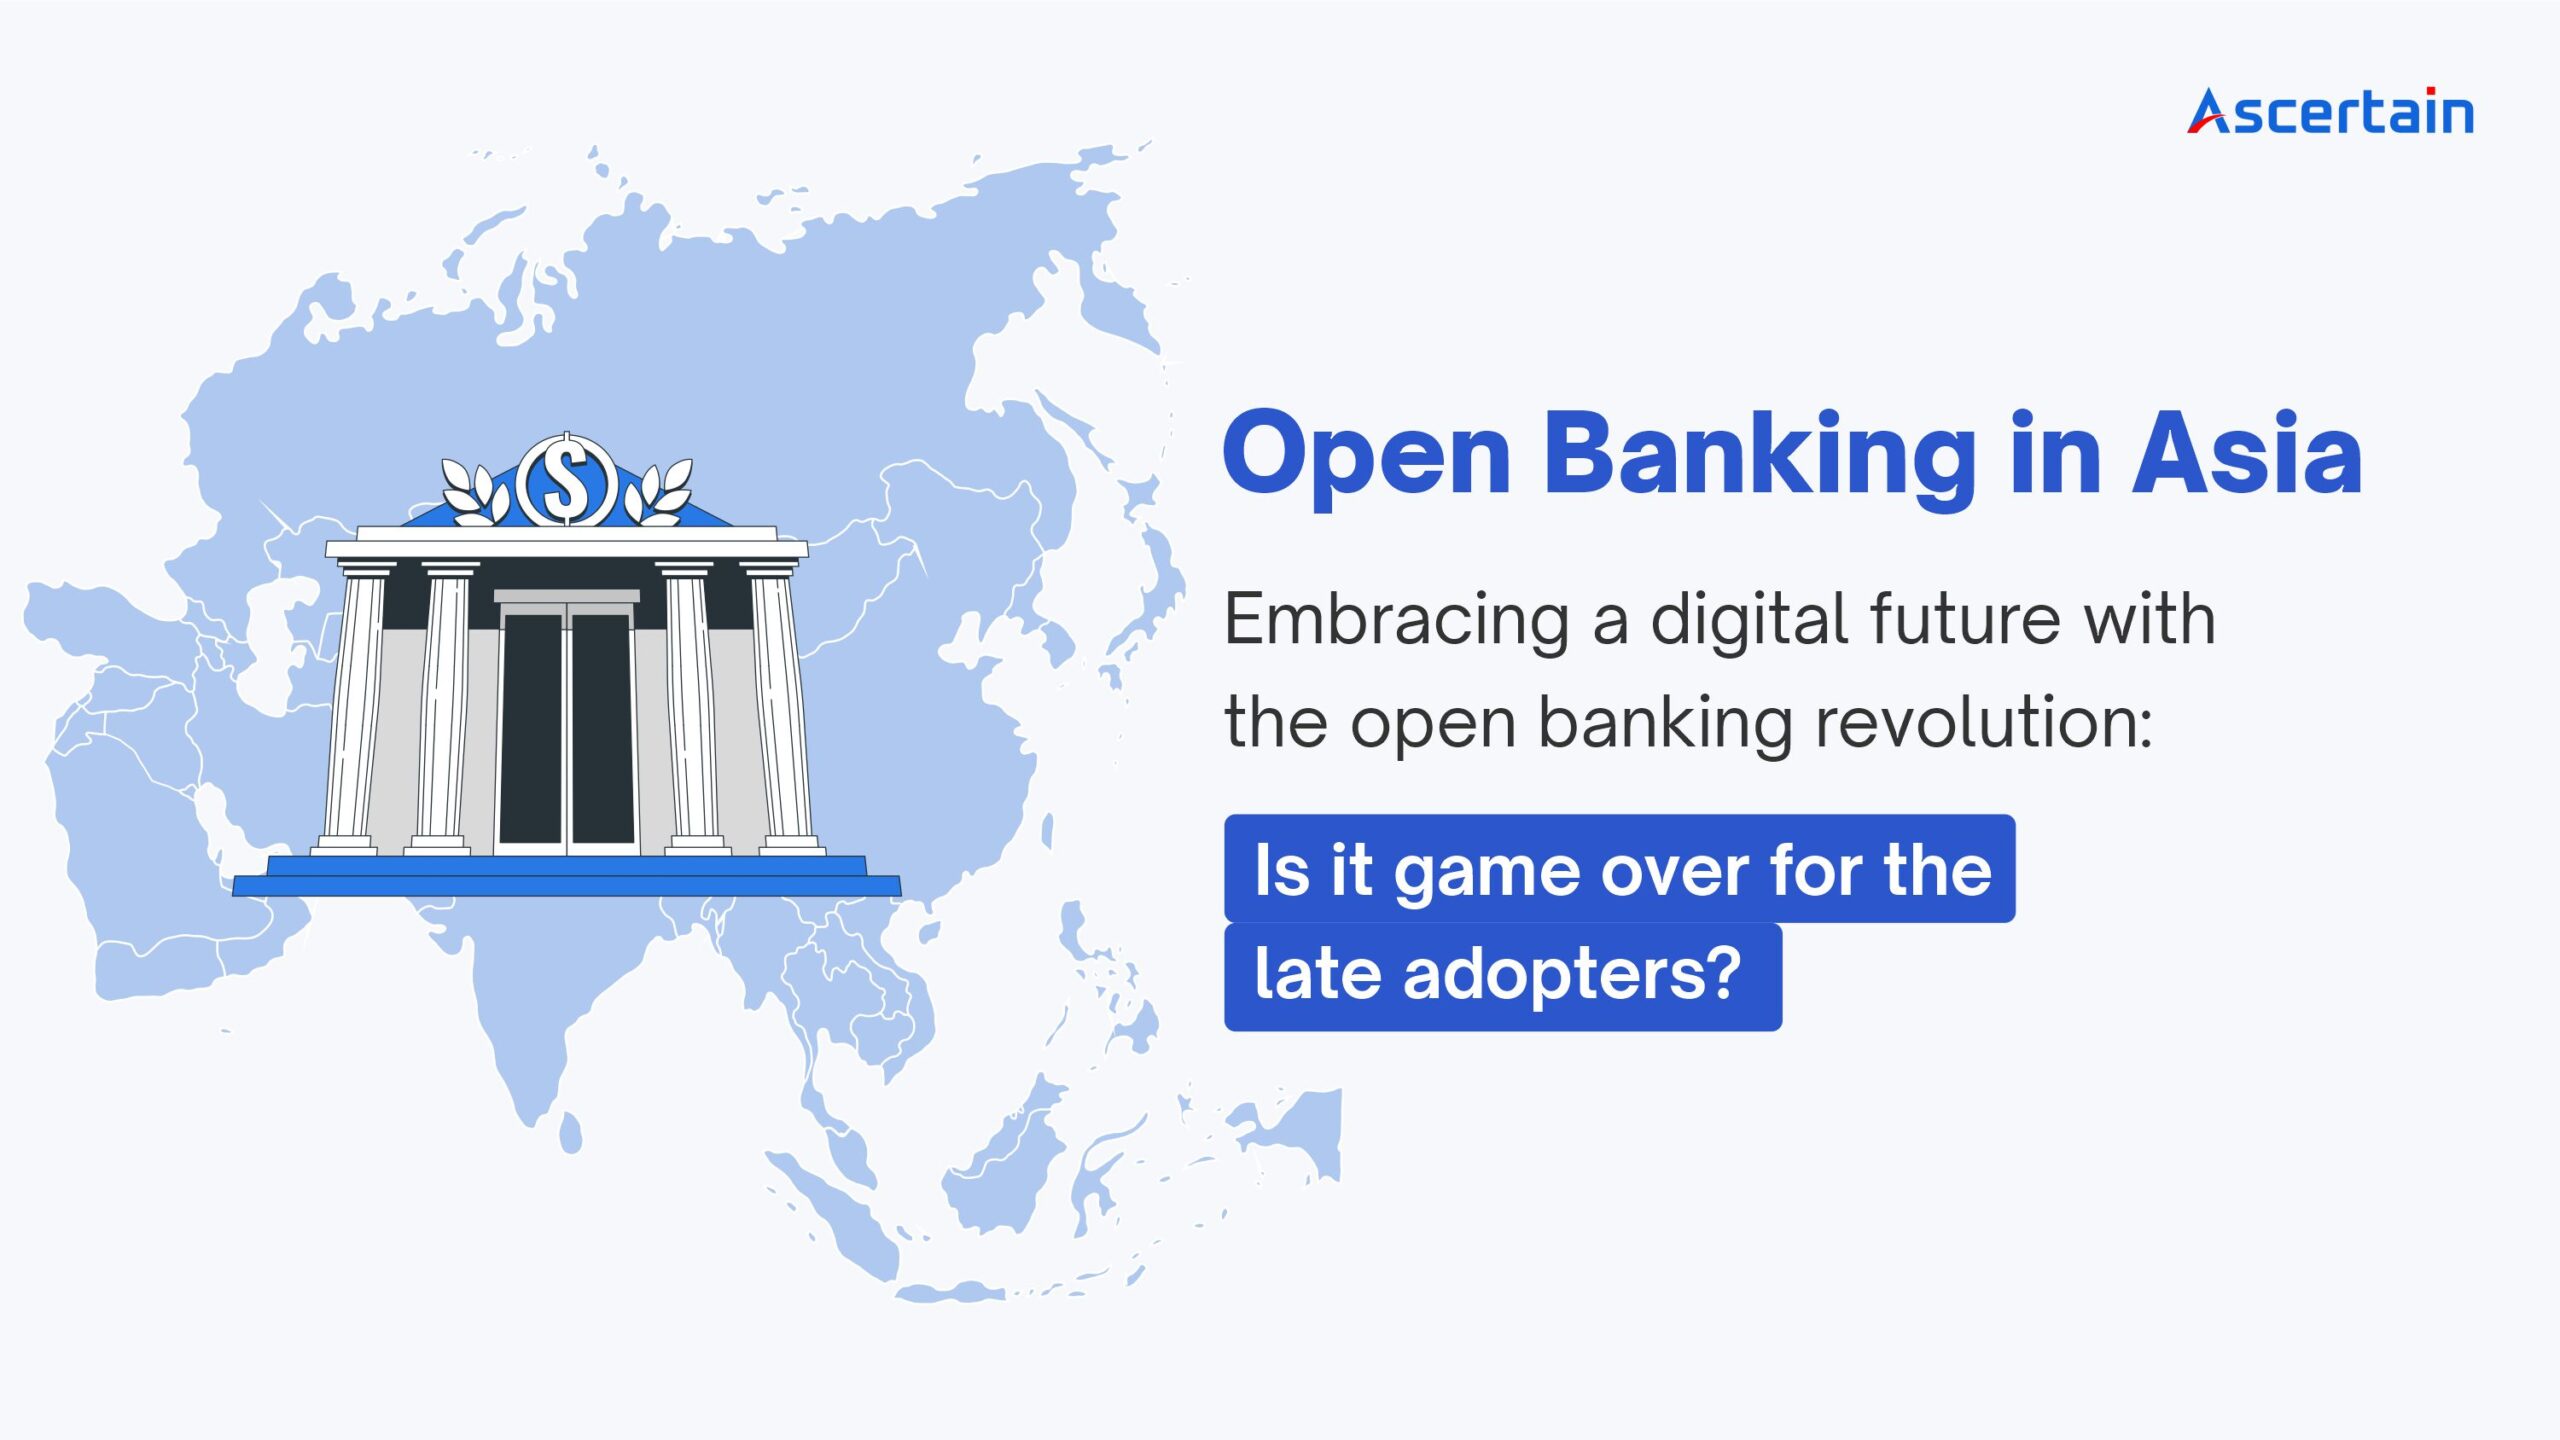 Open Banking in Asia – Is it game over for the late adopters?